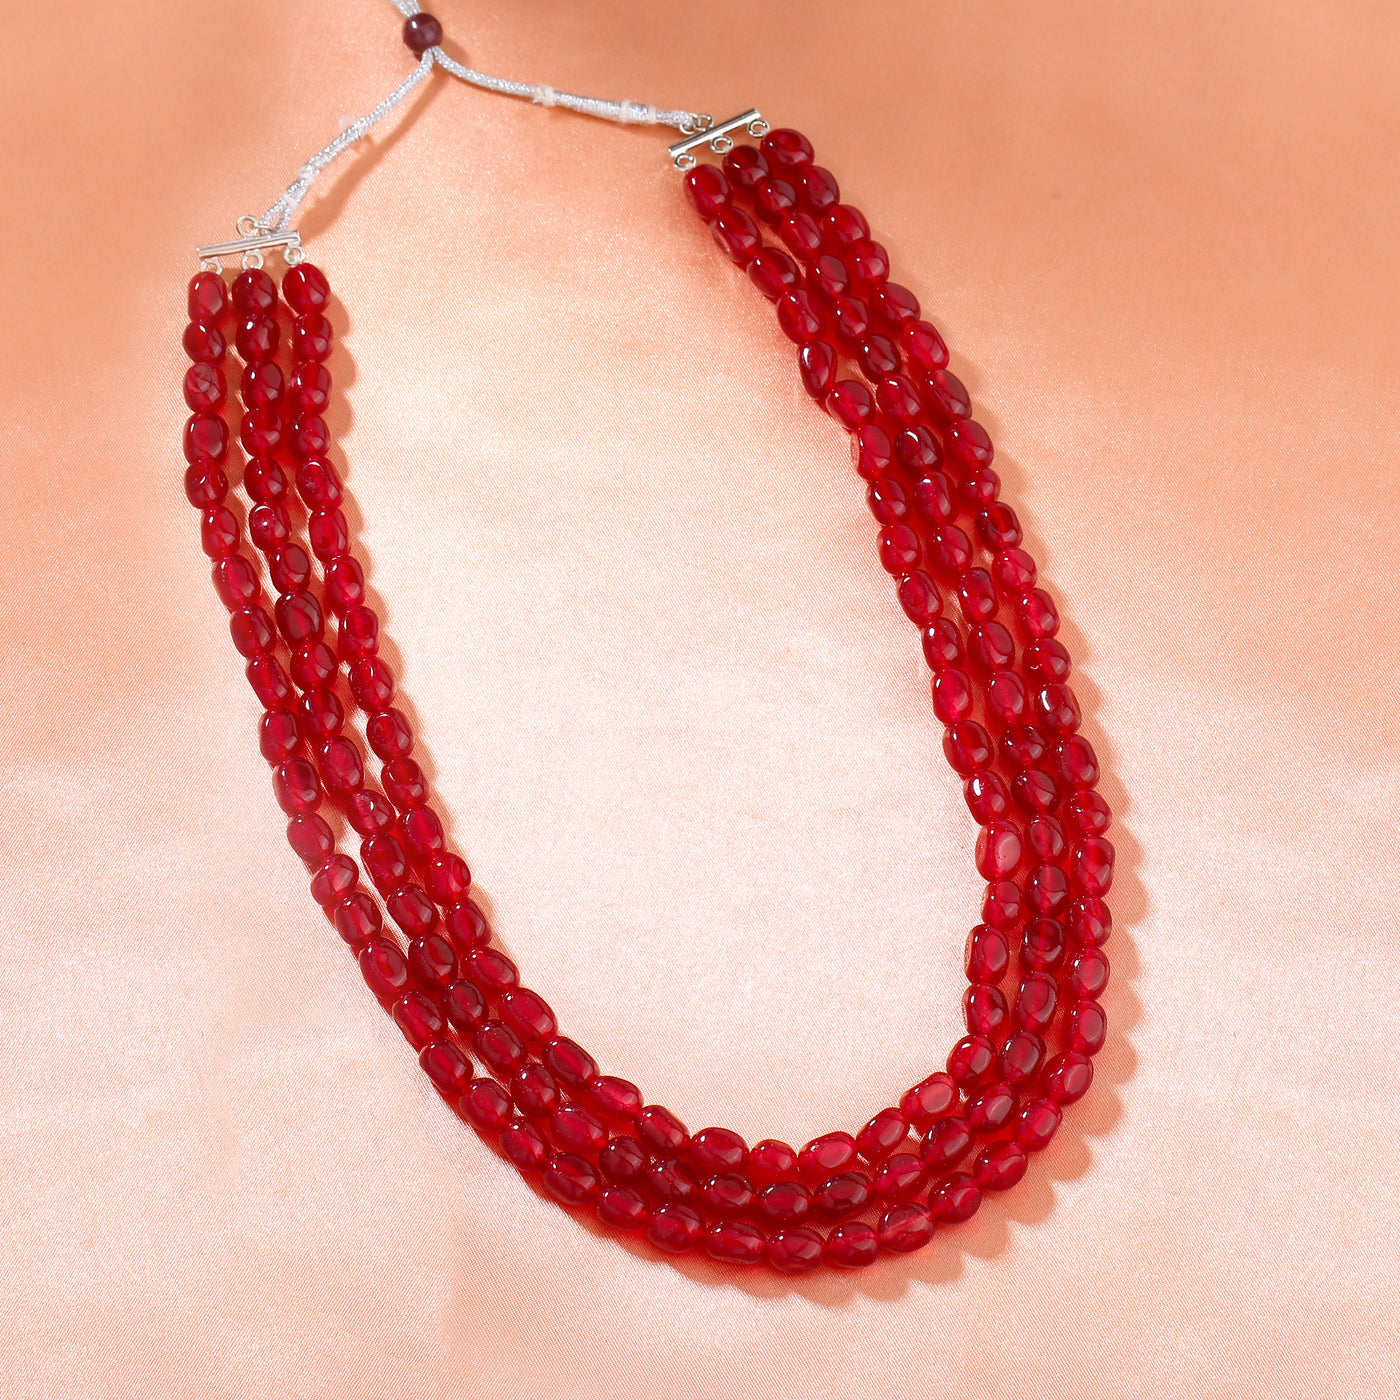 Estele Rhodium Plated Marvelous Designer Three Layered Necklace with Ruby Beads for Girls and Women